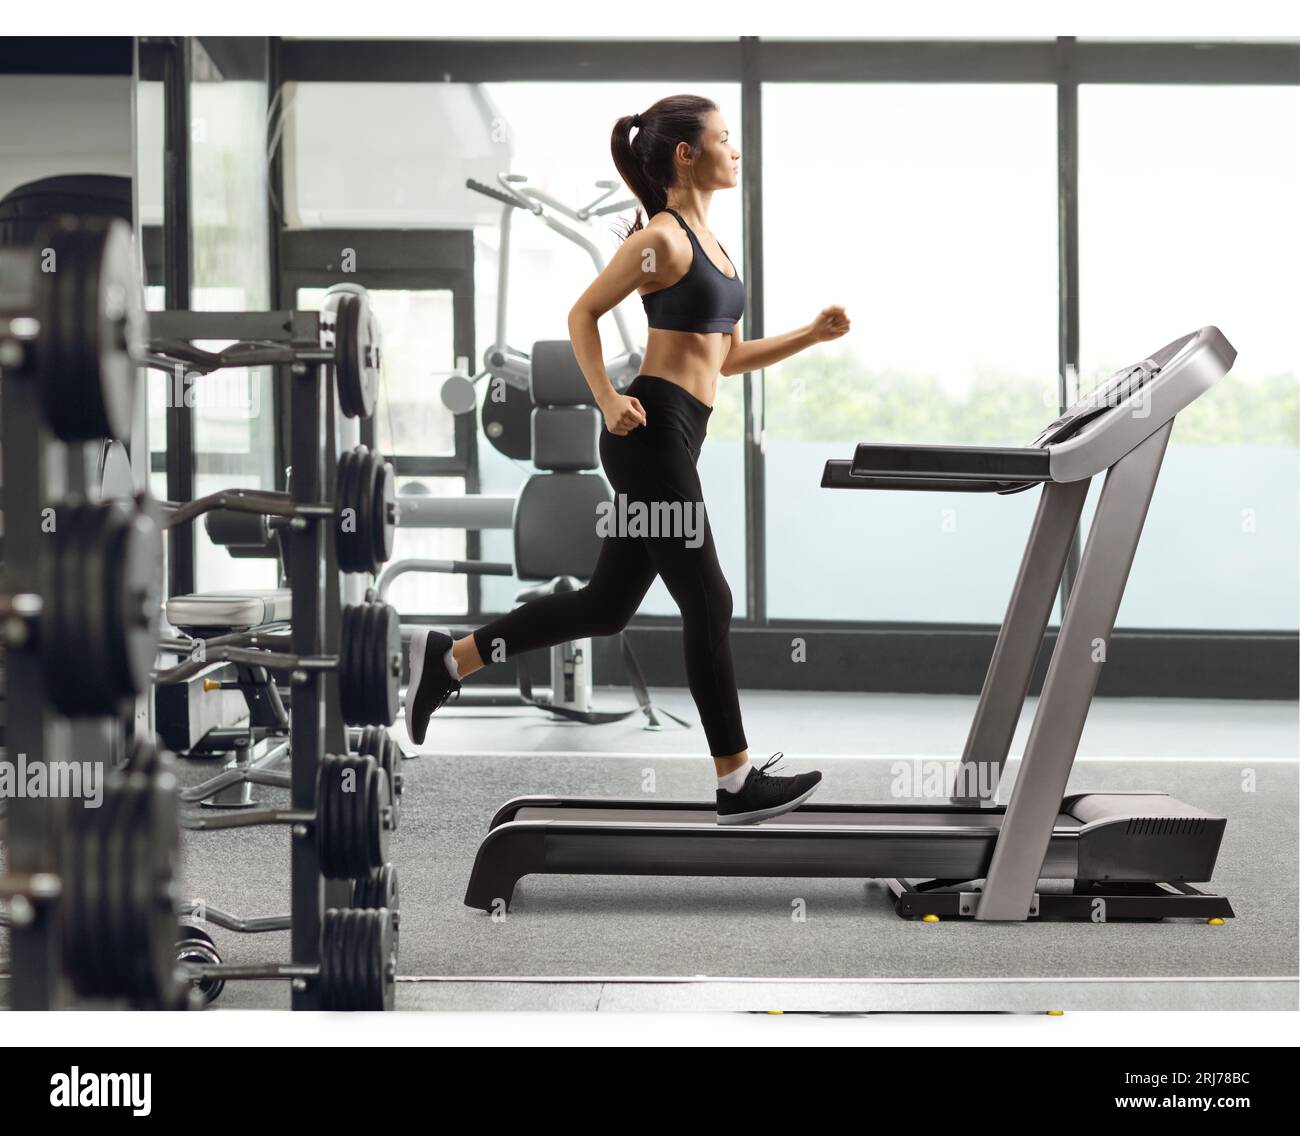 Full length profile shot of a young female in black leggings running on a treadmill at a gym Stock Photo